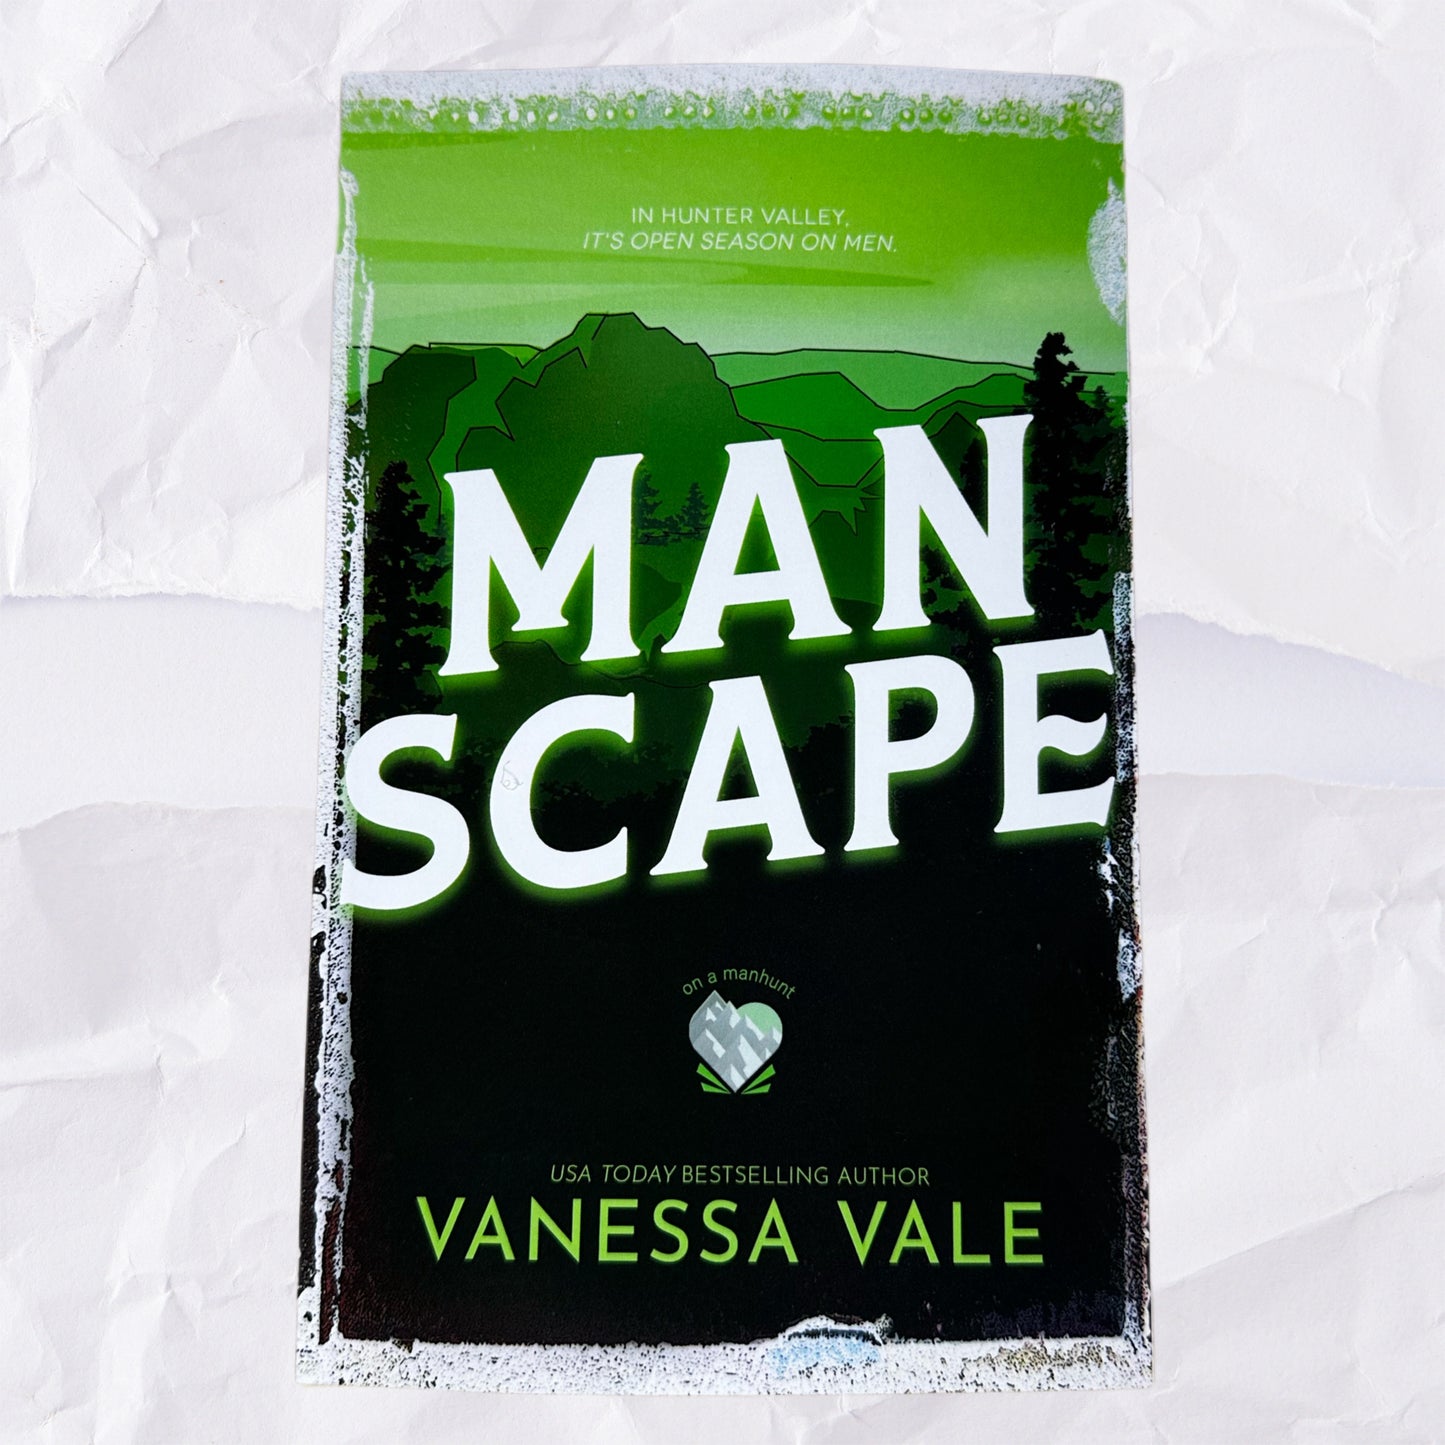 Man Scape (On a Manhunt #5) by Vanessa Vale